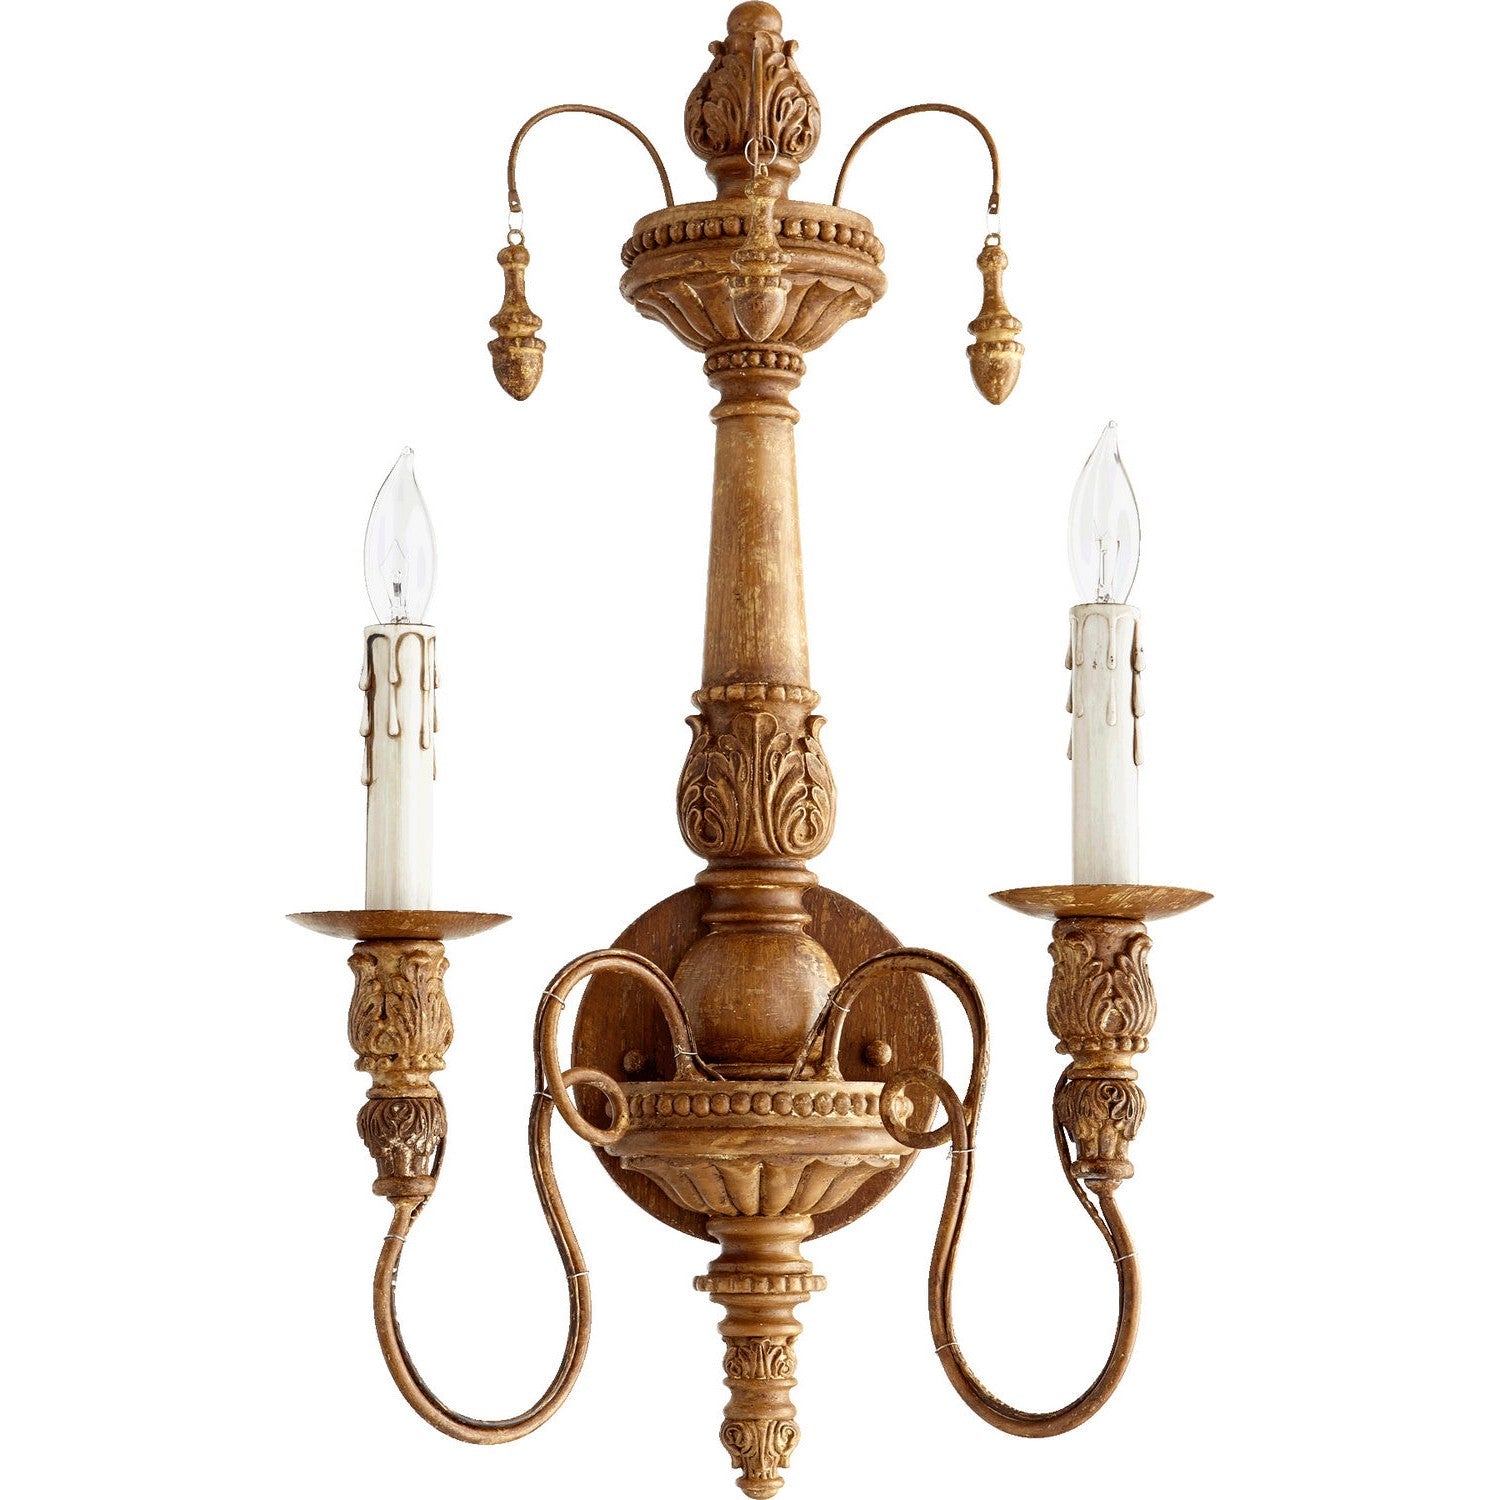 Quorum Salento 5506-2-94 Wall Sconce Light - French Umber